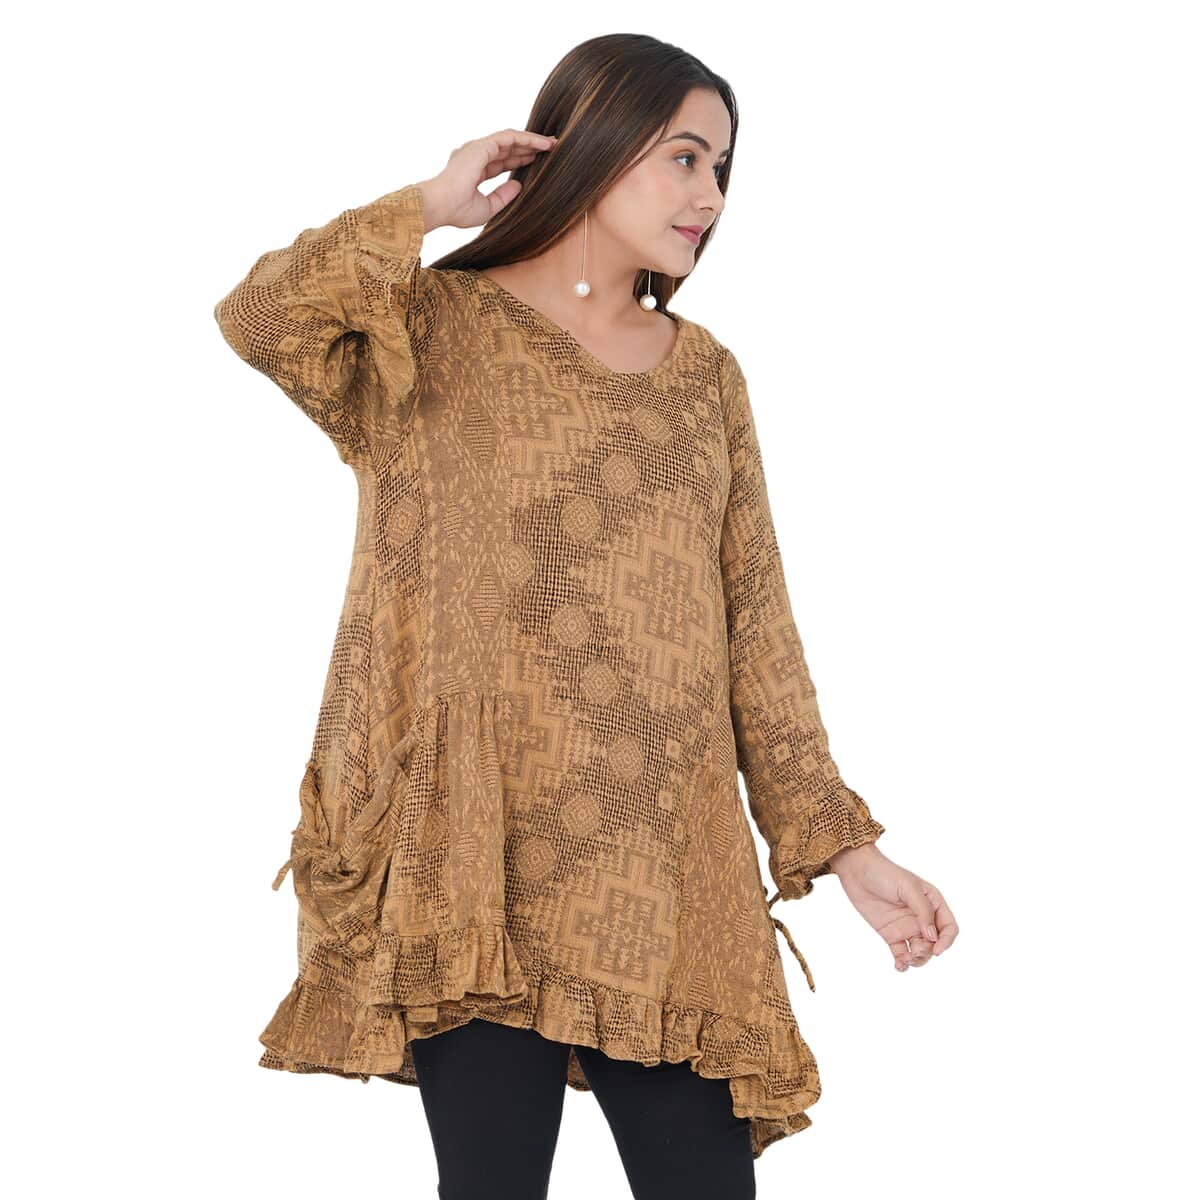 Tamsy Gold 100% Cotton Double Layer Jacquard Ruffle Hem Top - L/XL image number 3